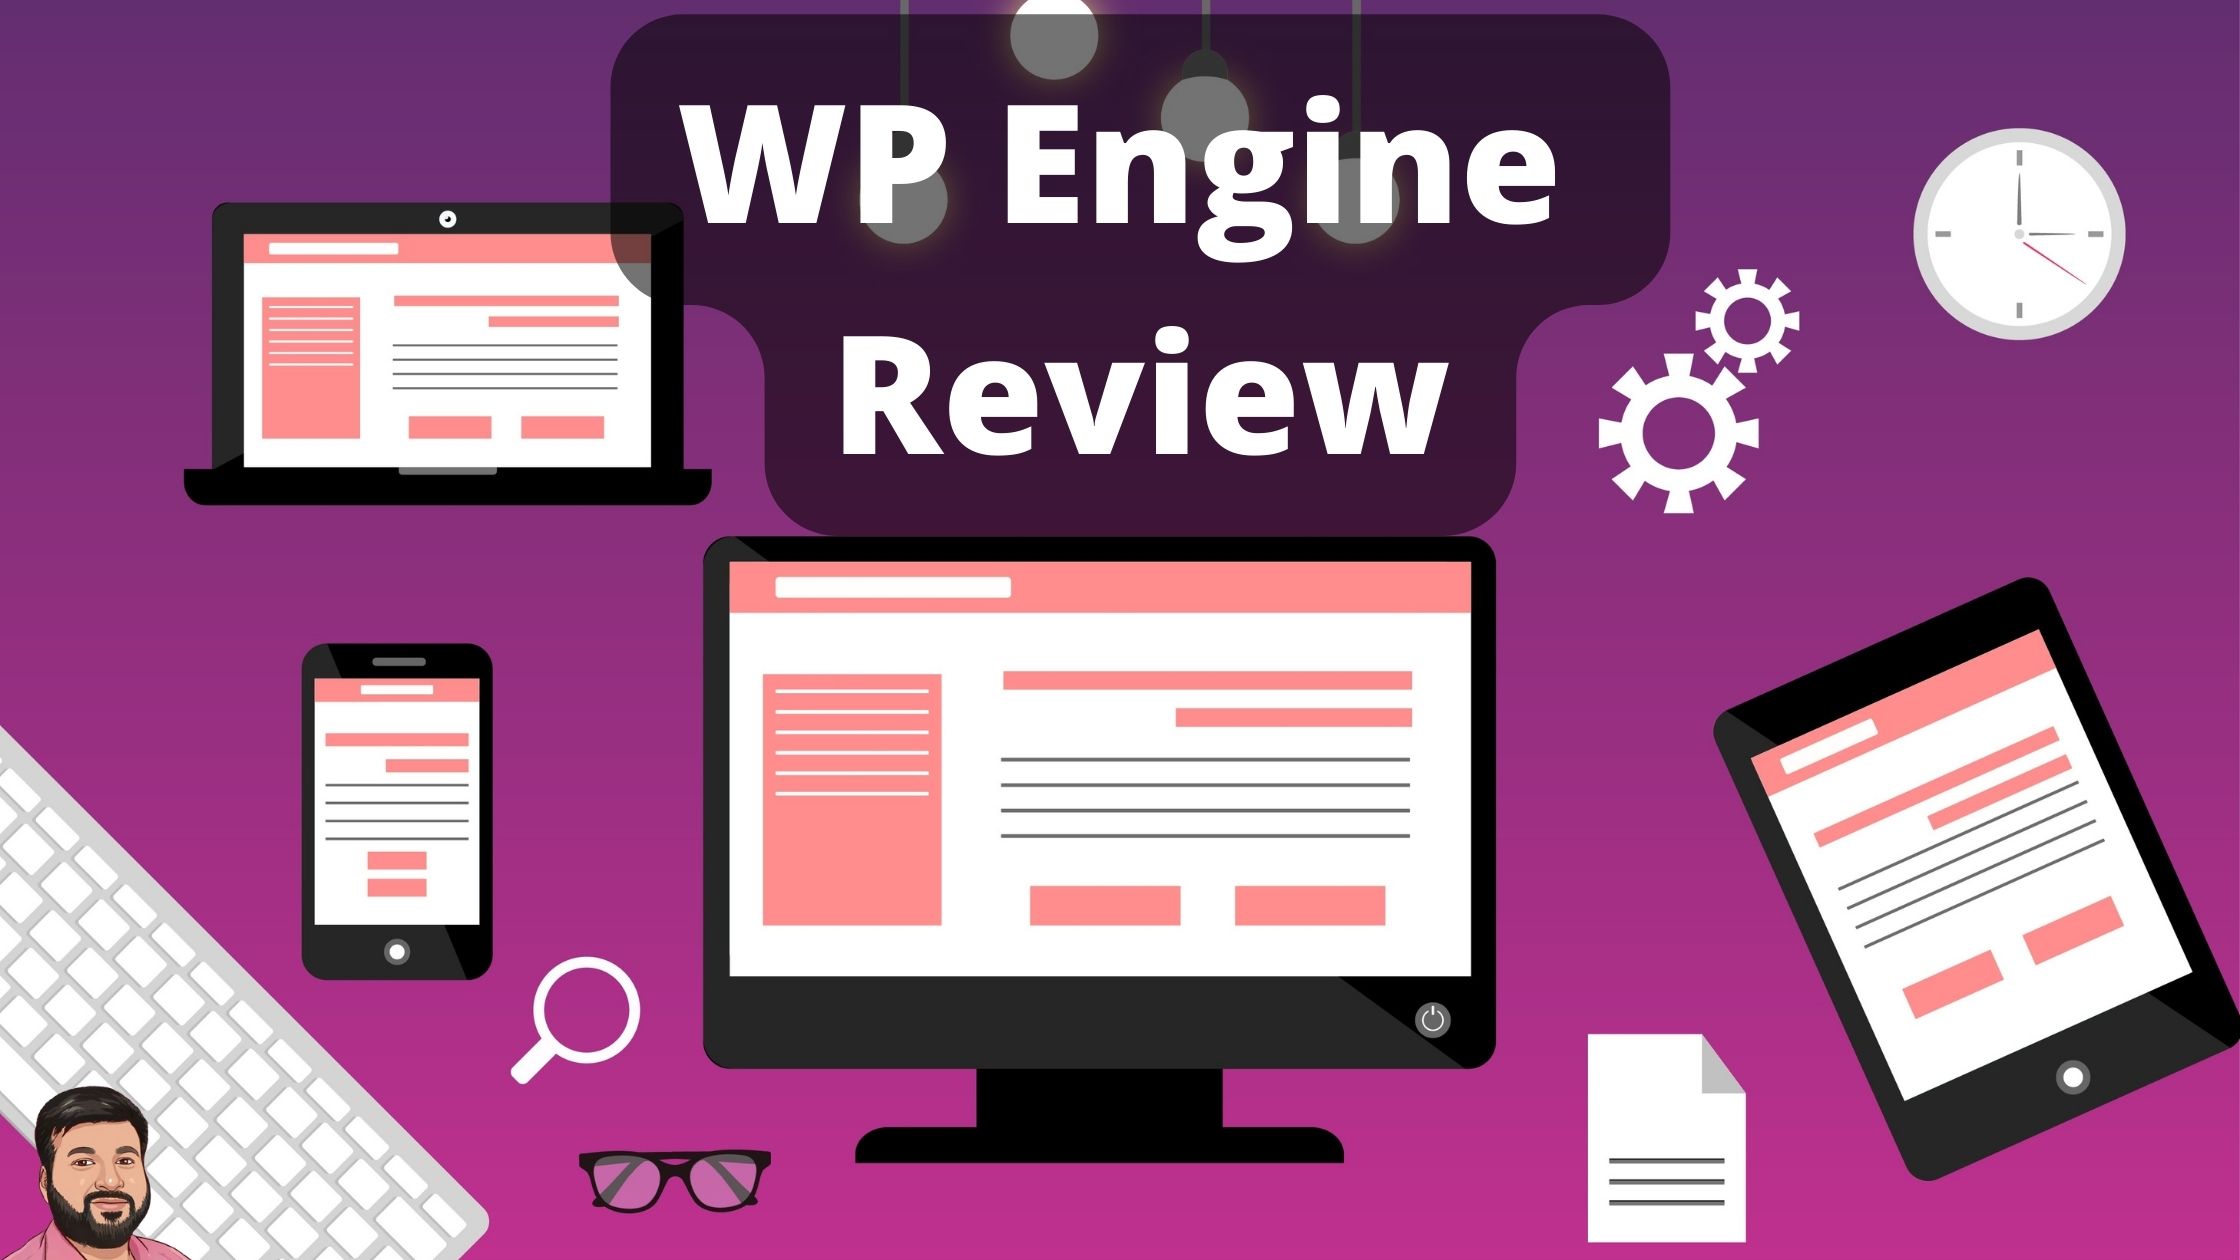 WP Engine Review: Unbiased Pros & Cons